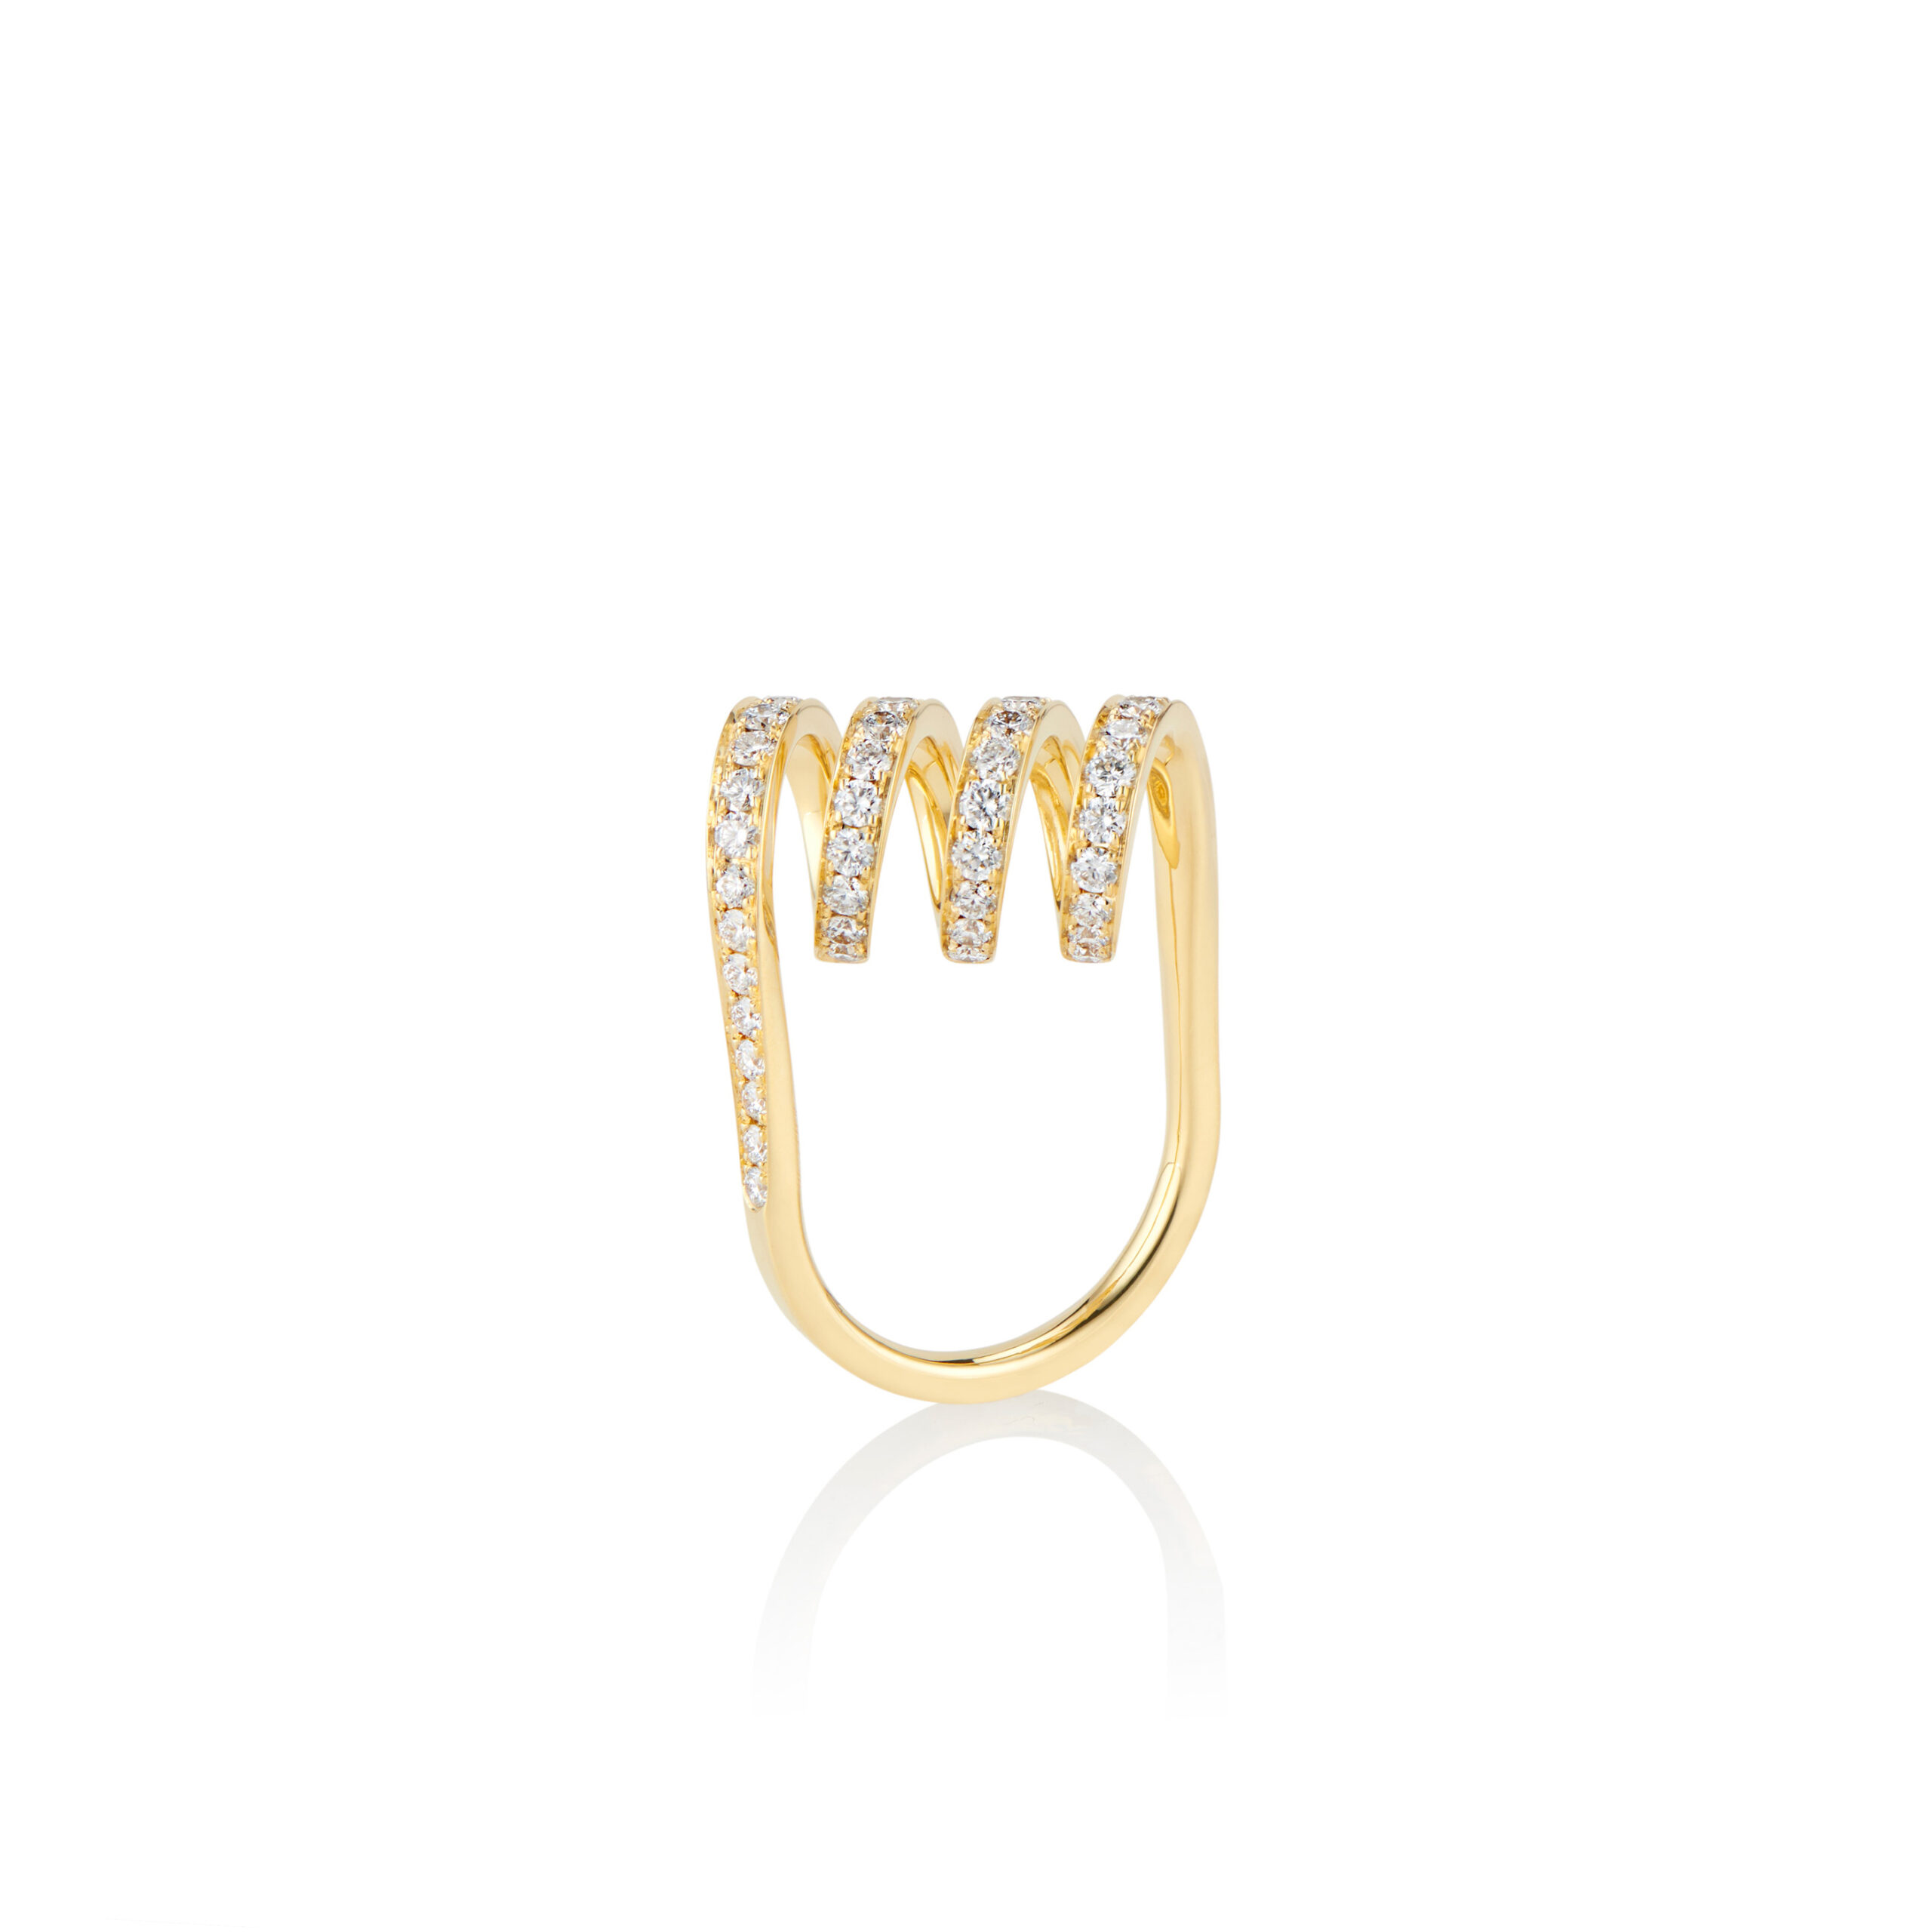 This is a photo of the Pave Curl Ring designed by Sardwell for Renisis. It features a unique spiral design in 18k yellow gold and pave‘ diamonds.